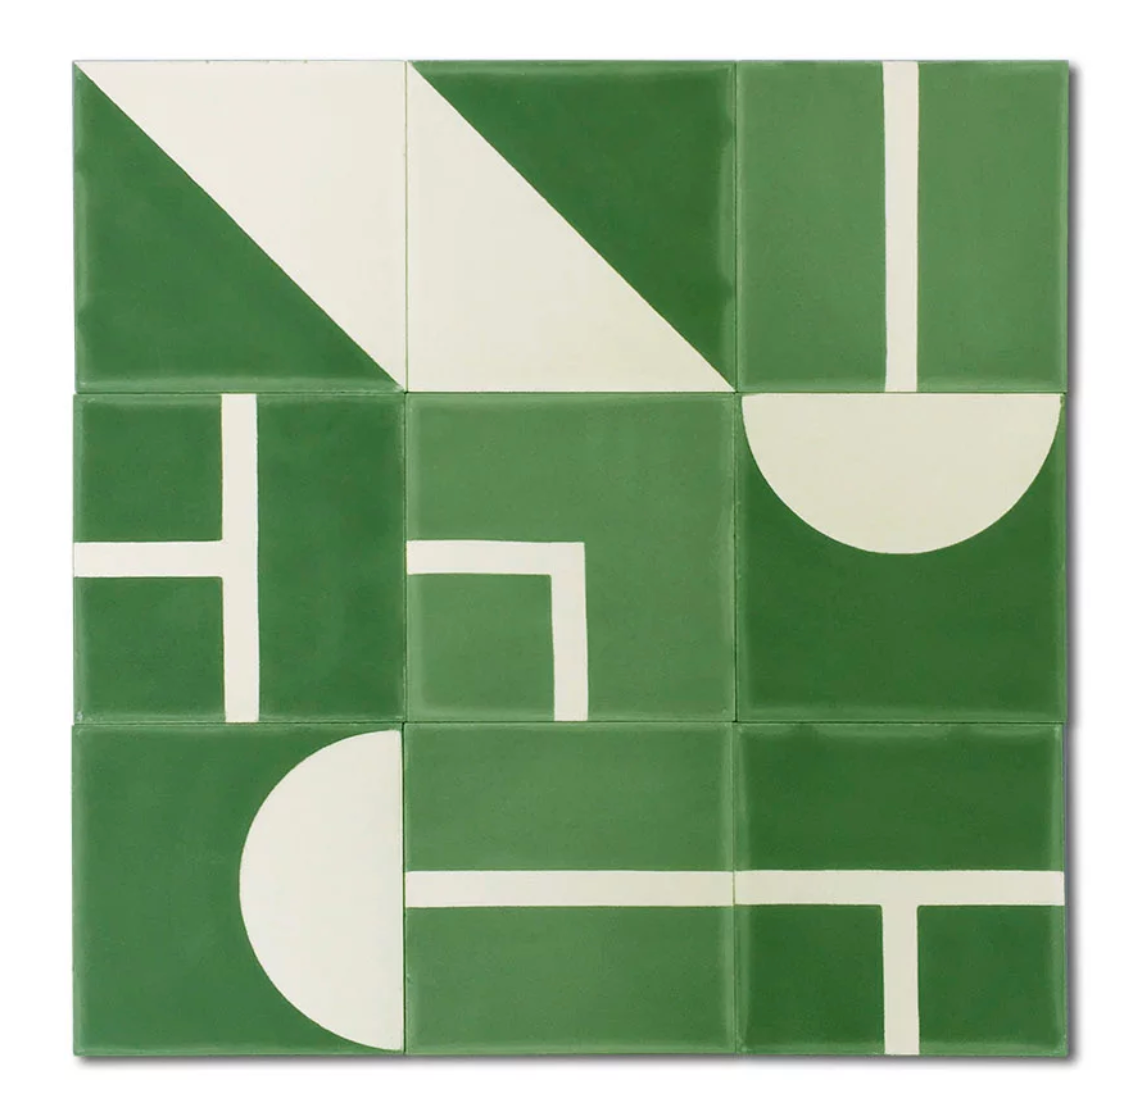 No One Would Ever Accuse These 40 Colorful Tiles of Being Boring